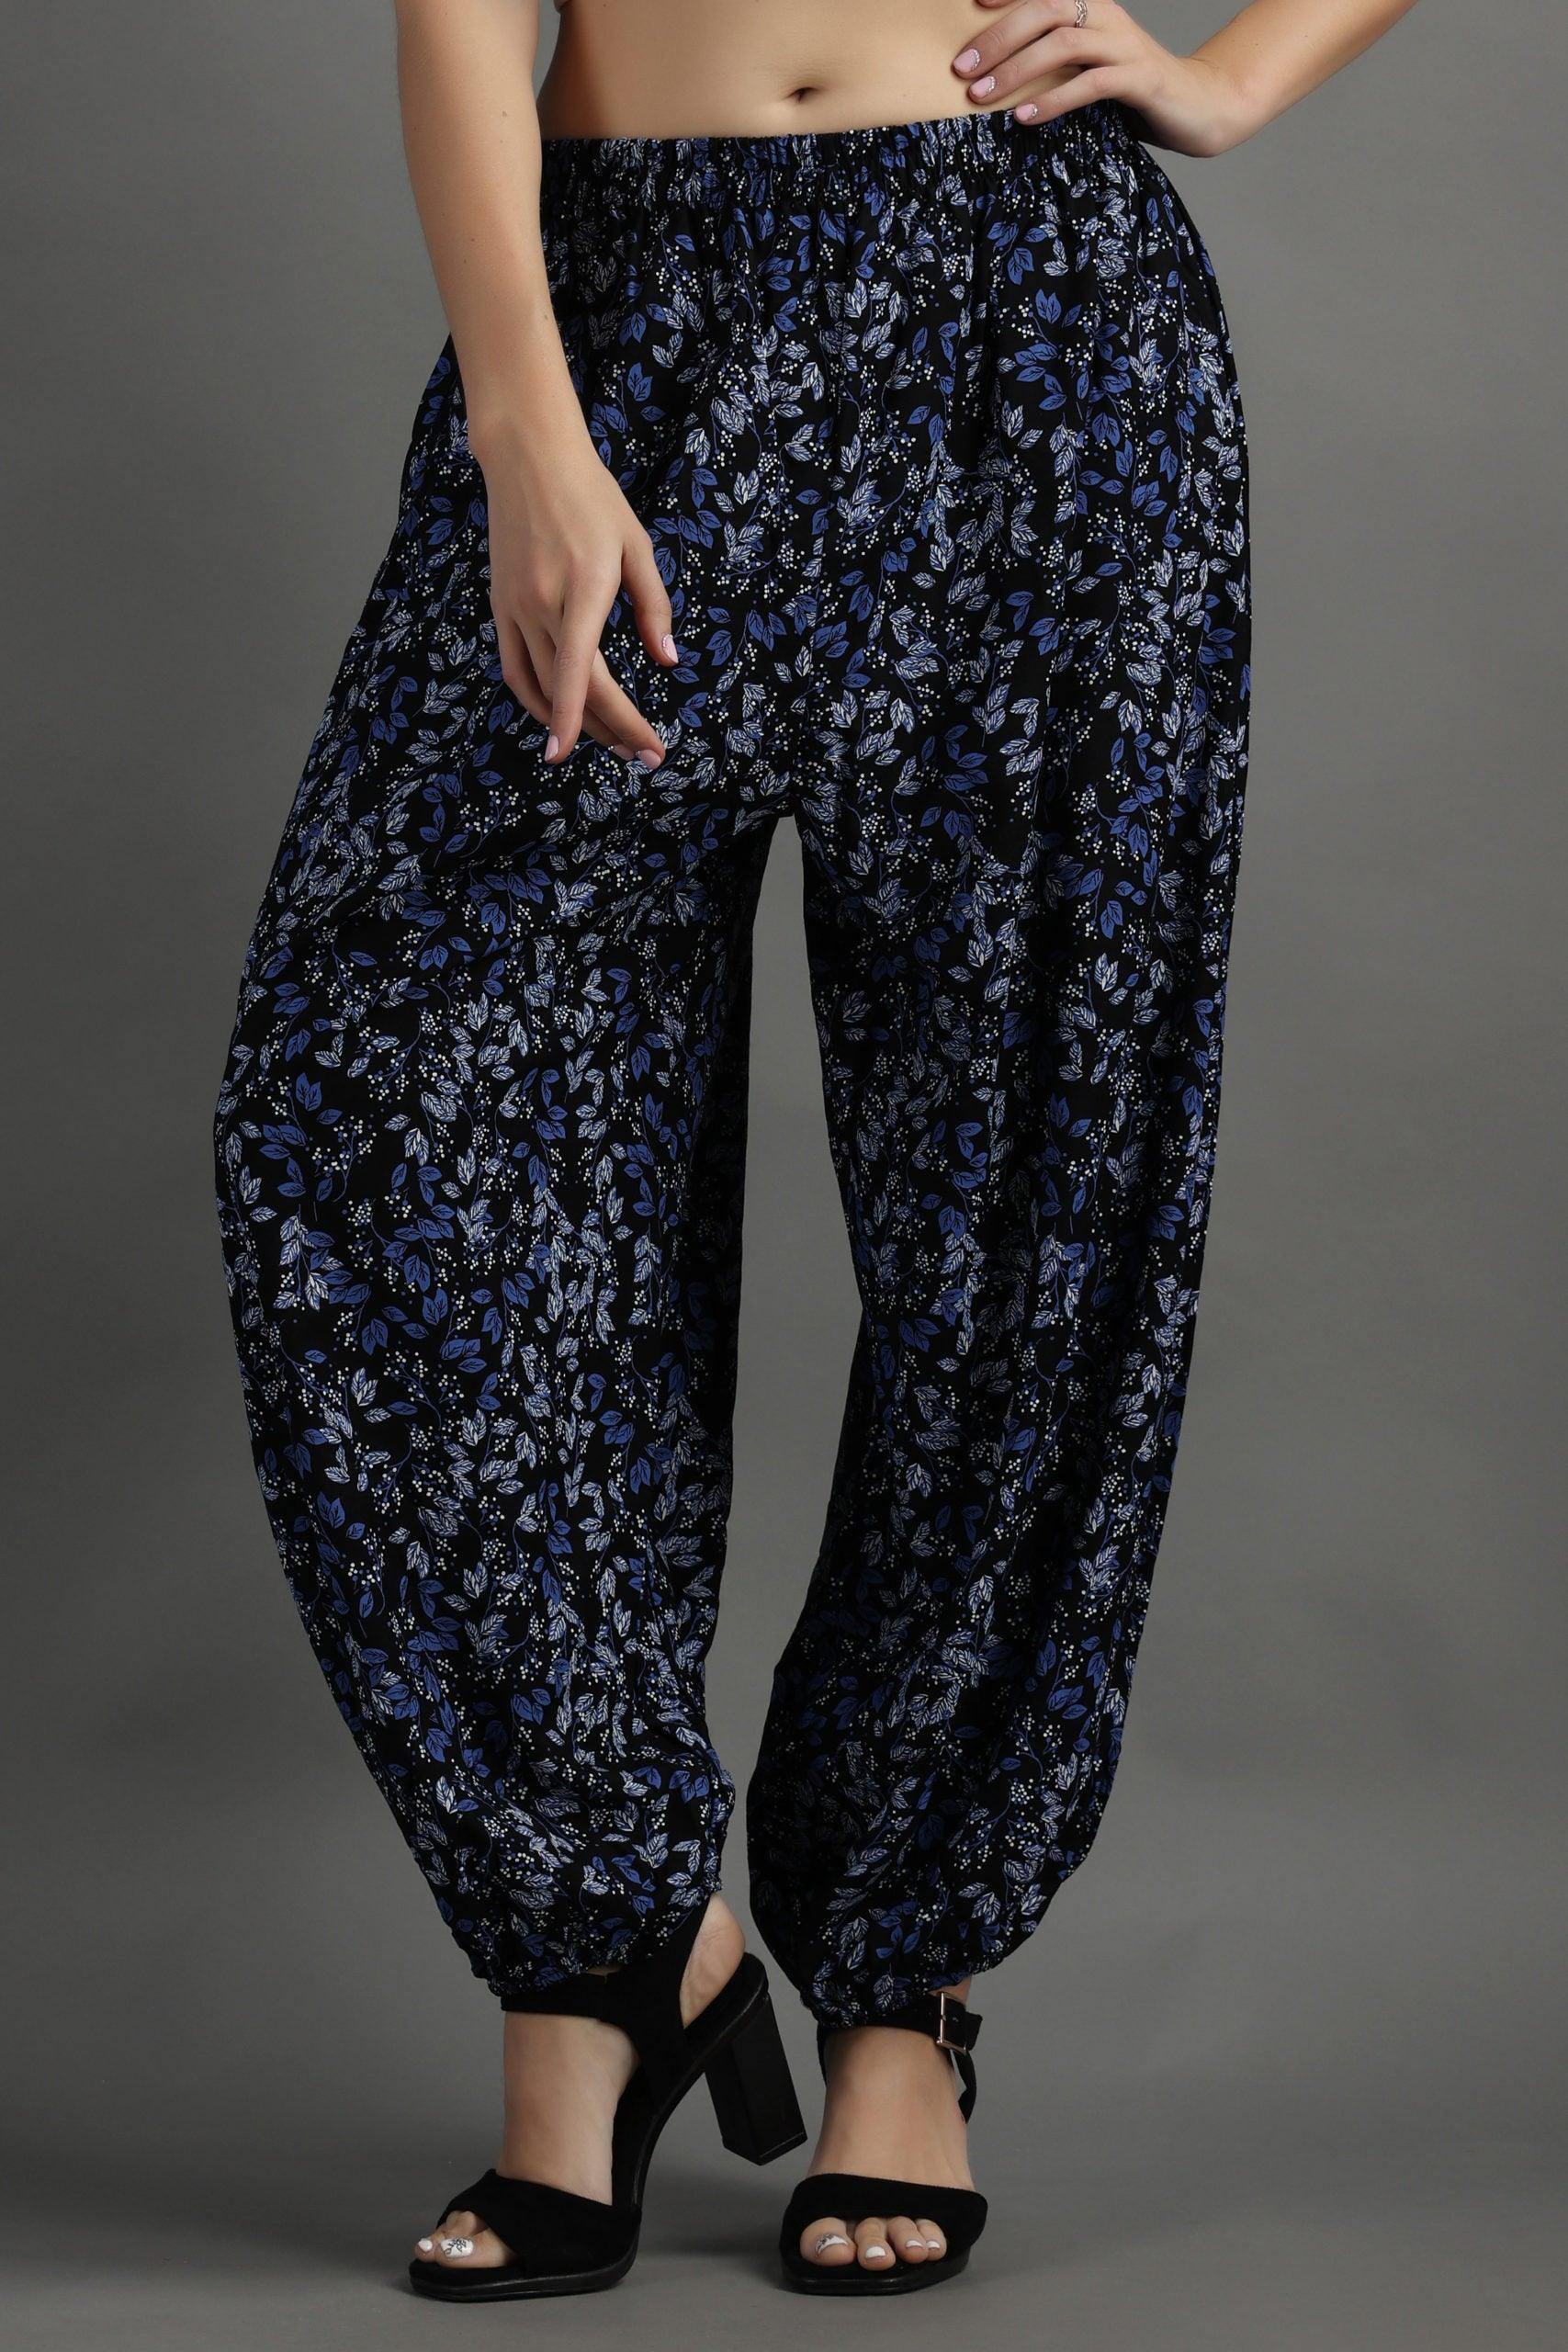 Cotton Printed Regular Wear Harem Pants at Rs 250/piece in Delhi | ID:  22810442191